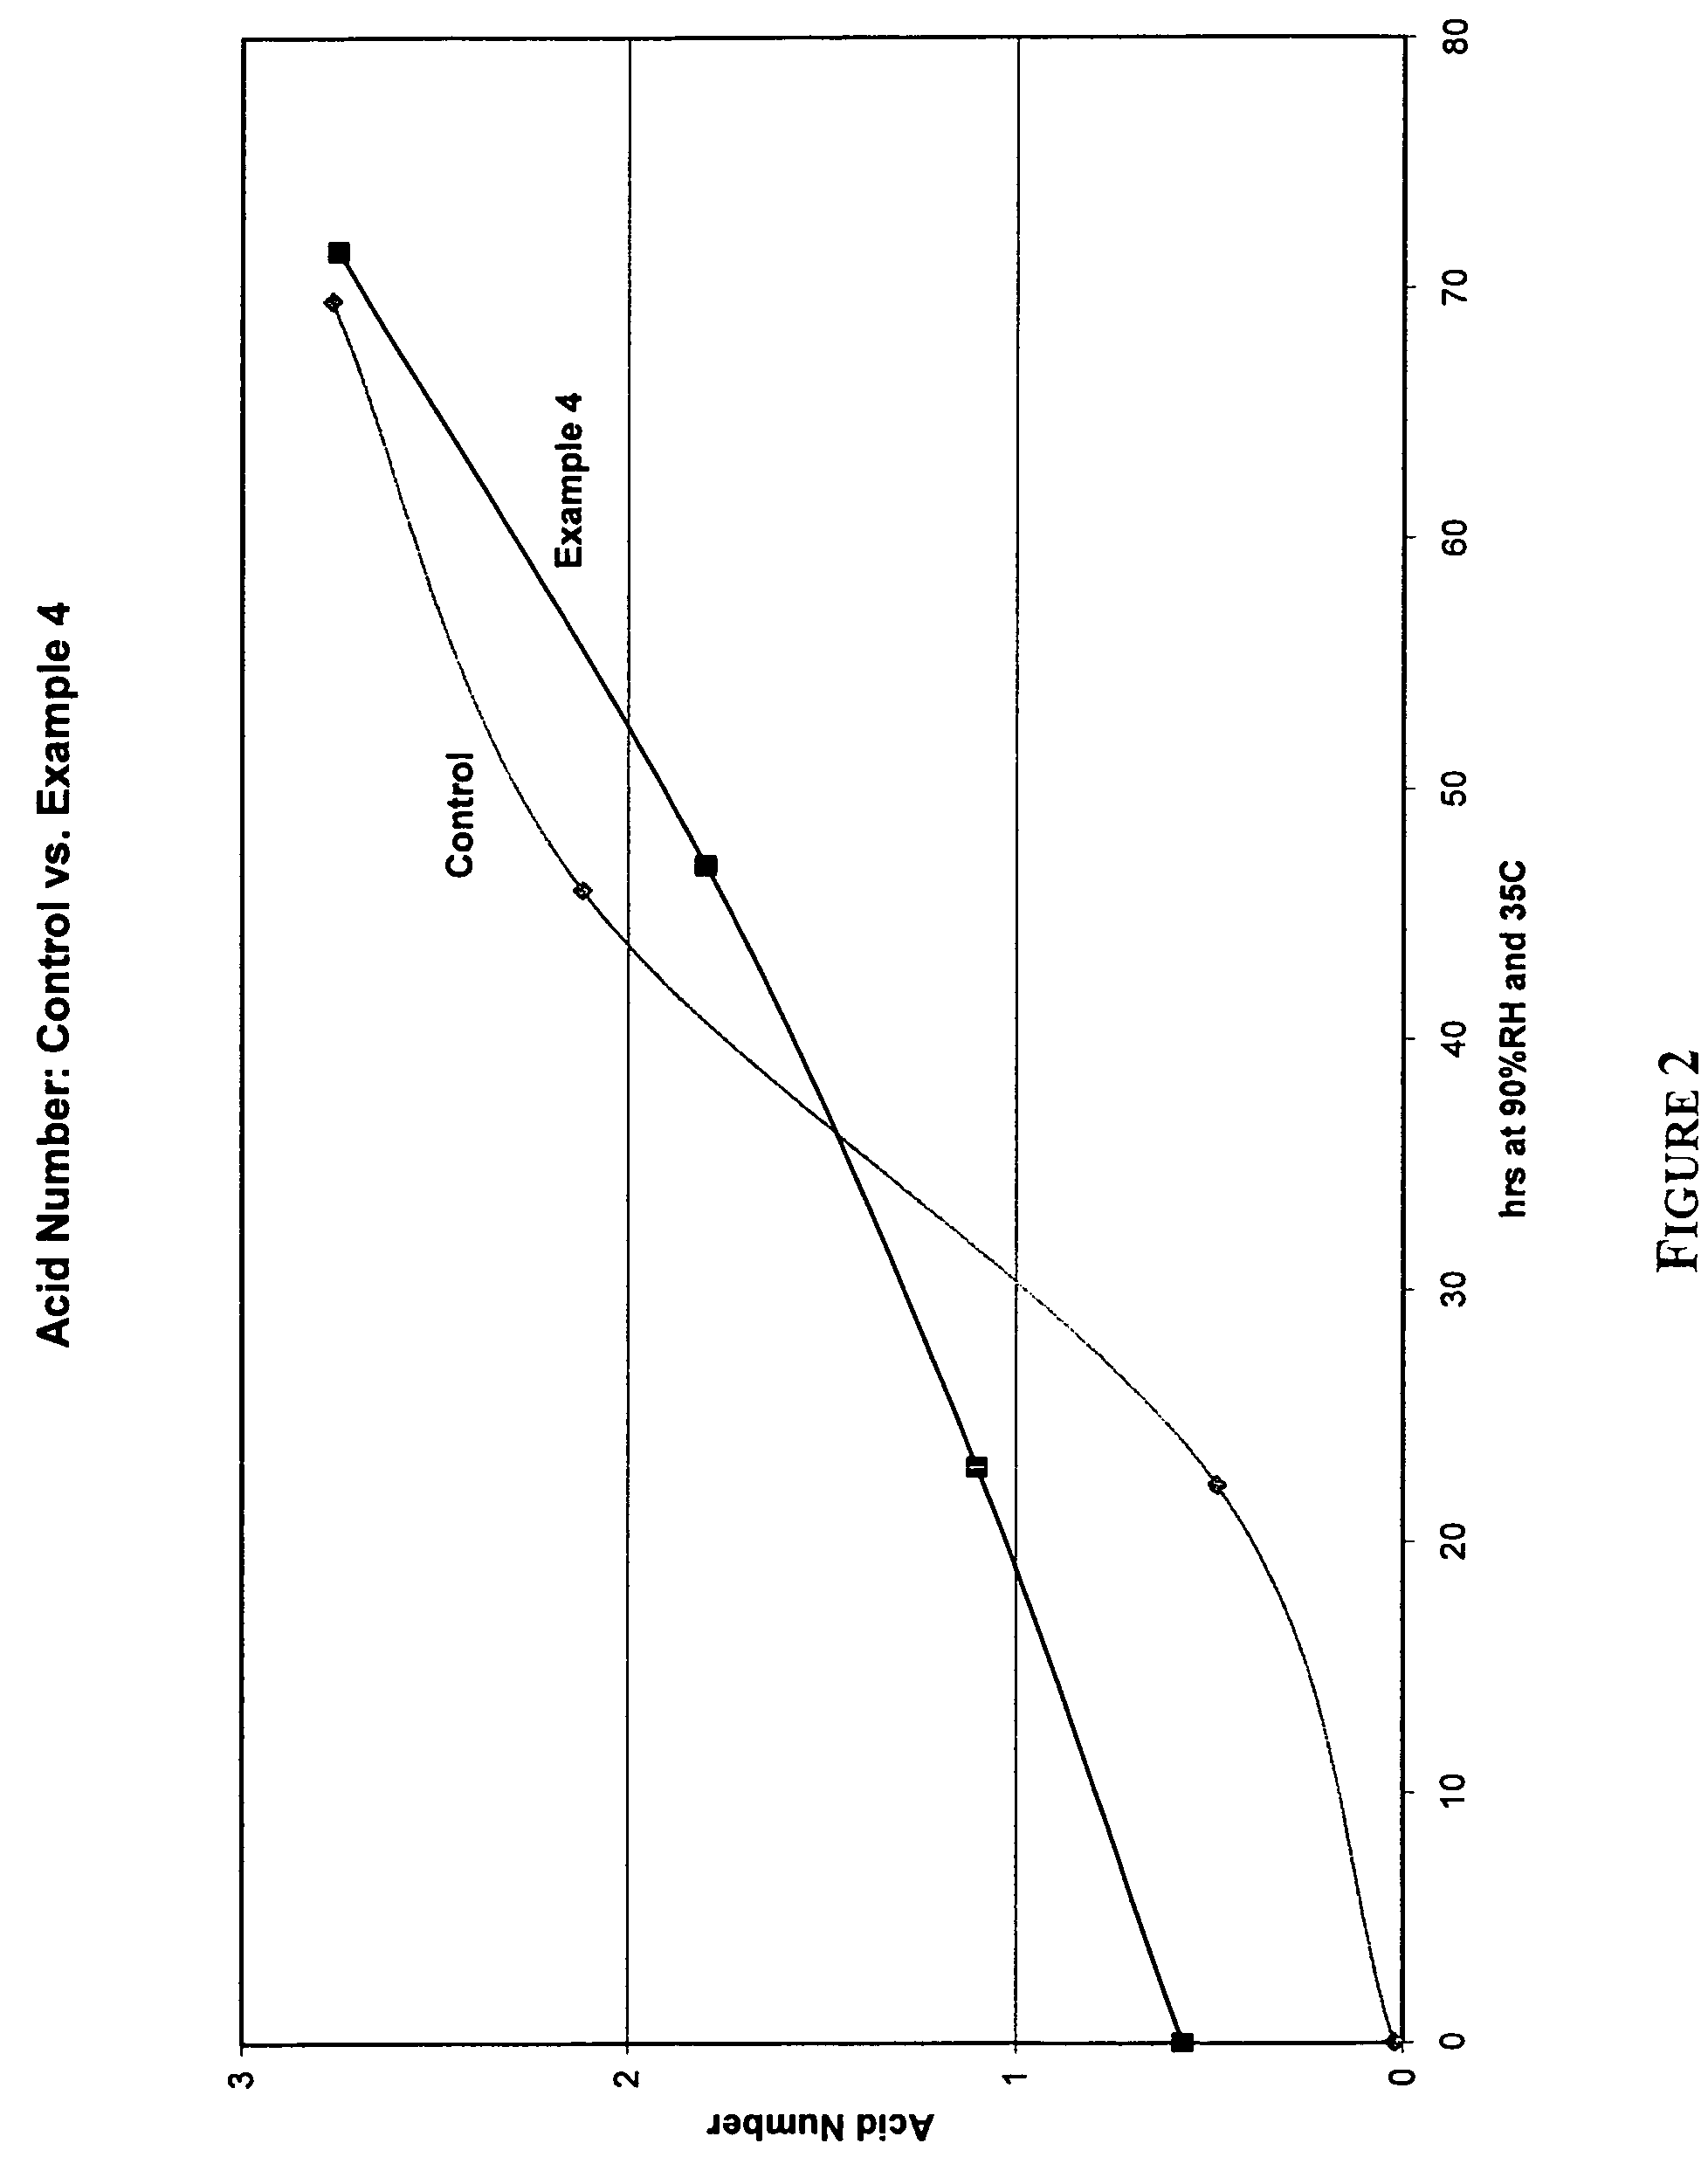 Blended phosphite or phosphonite compositions having improved hydrolytic stability